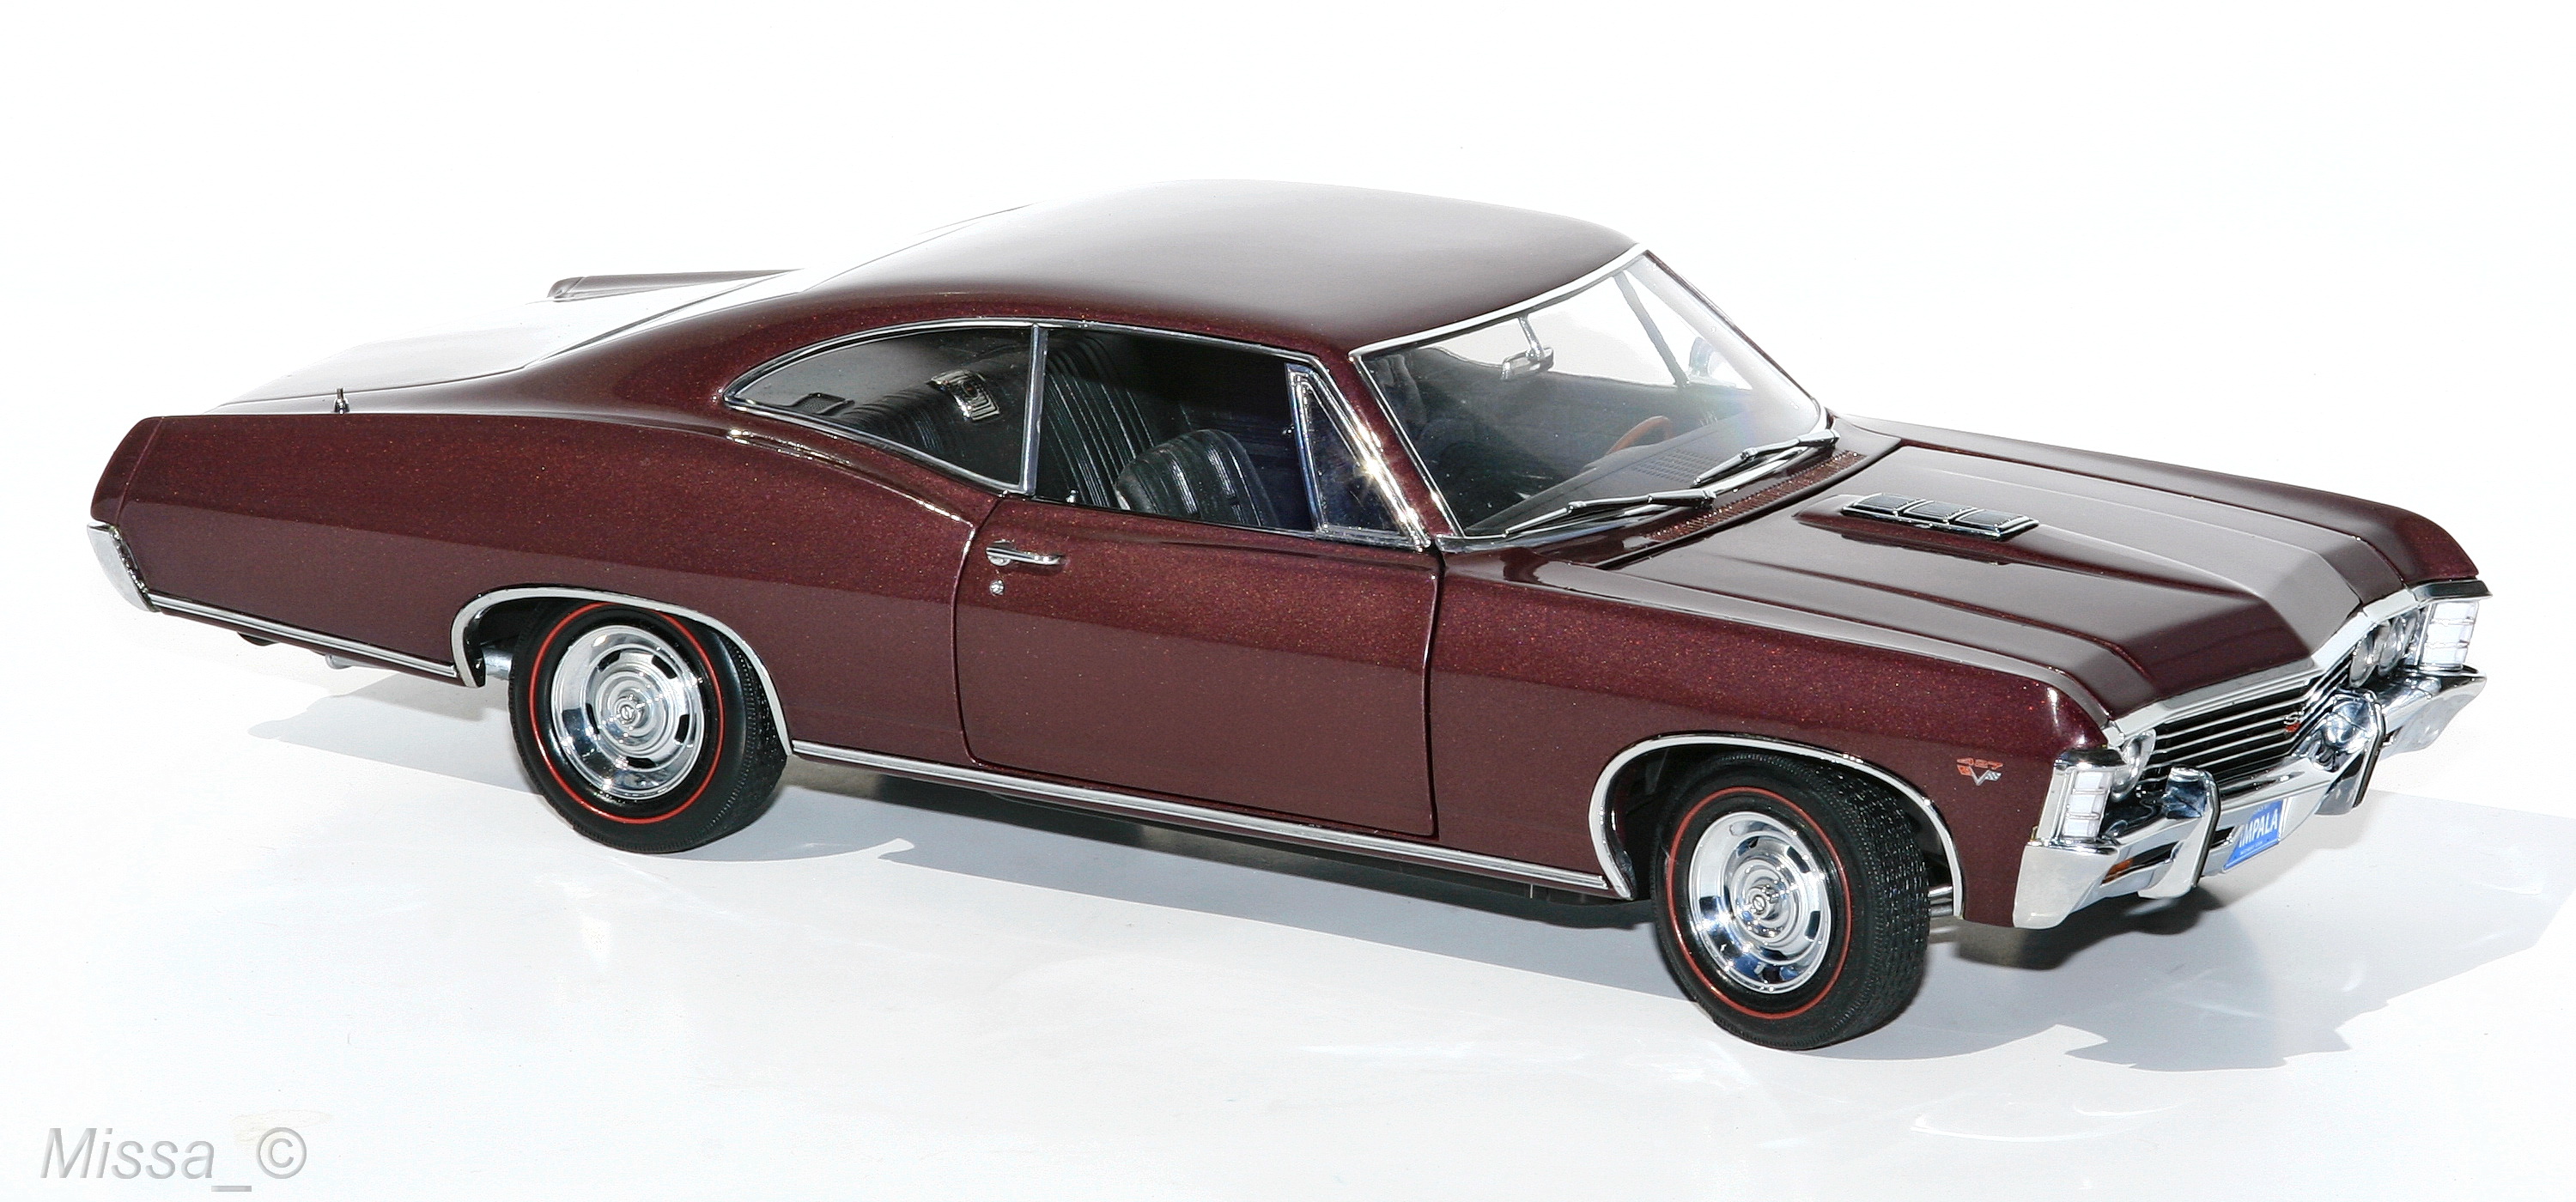 Details about   1967 IMPALA SS 1:18 GREEN CHEVROLET ERTL AMERICAN MUSCLE AUTHENTICS 